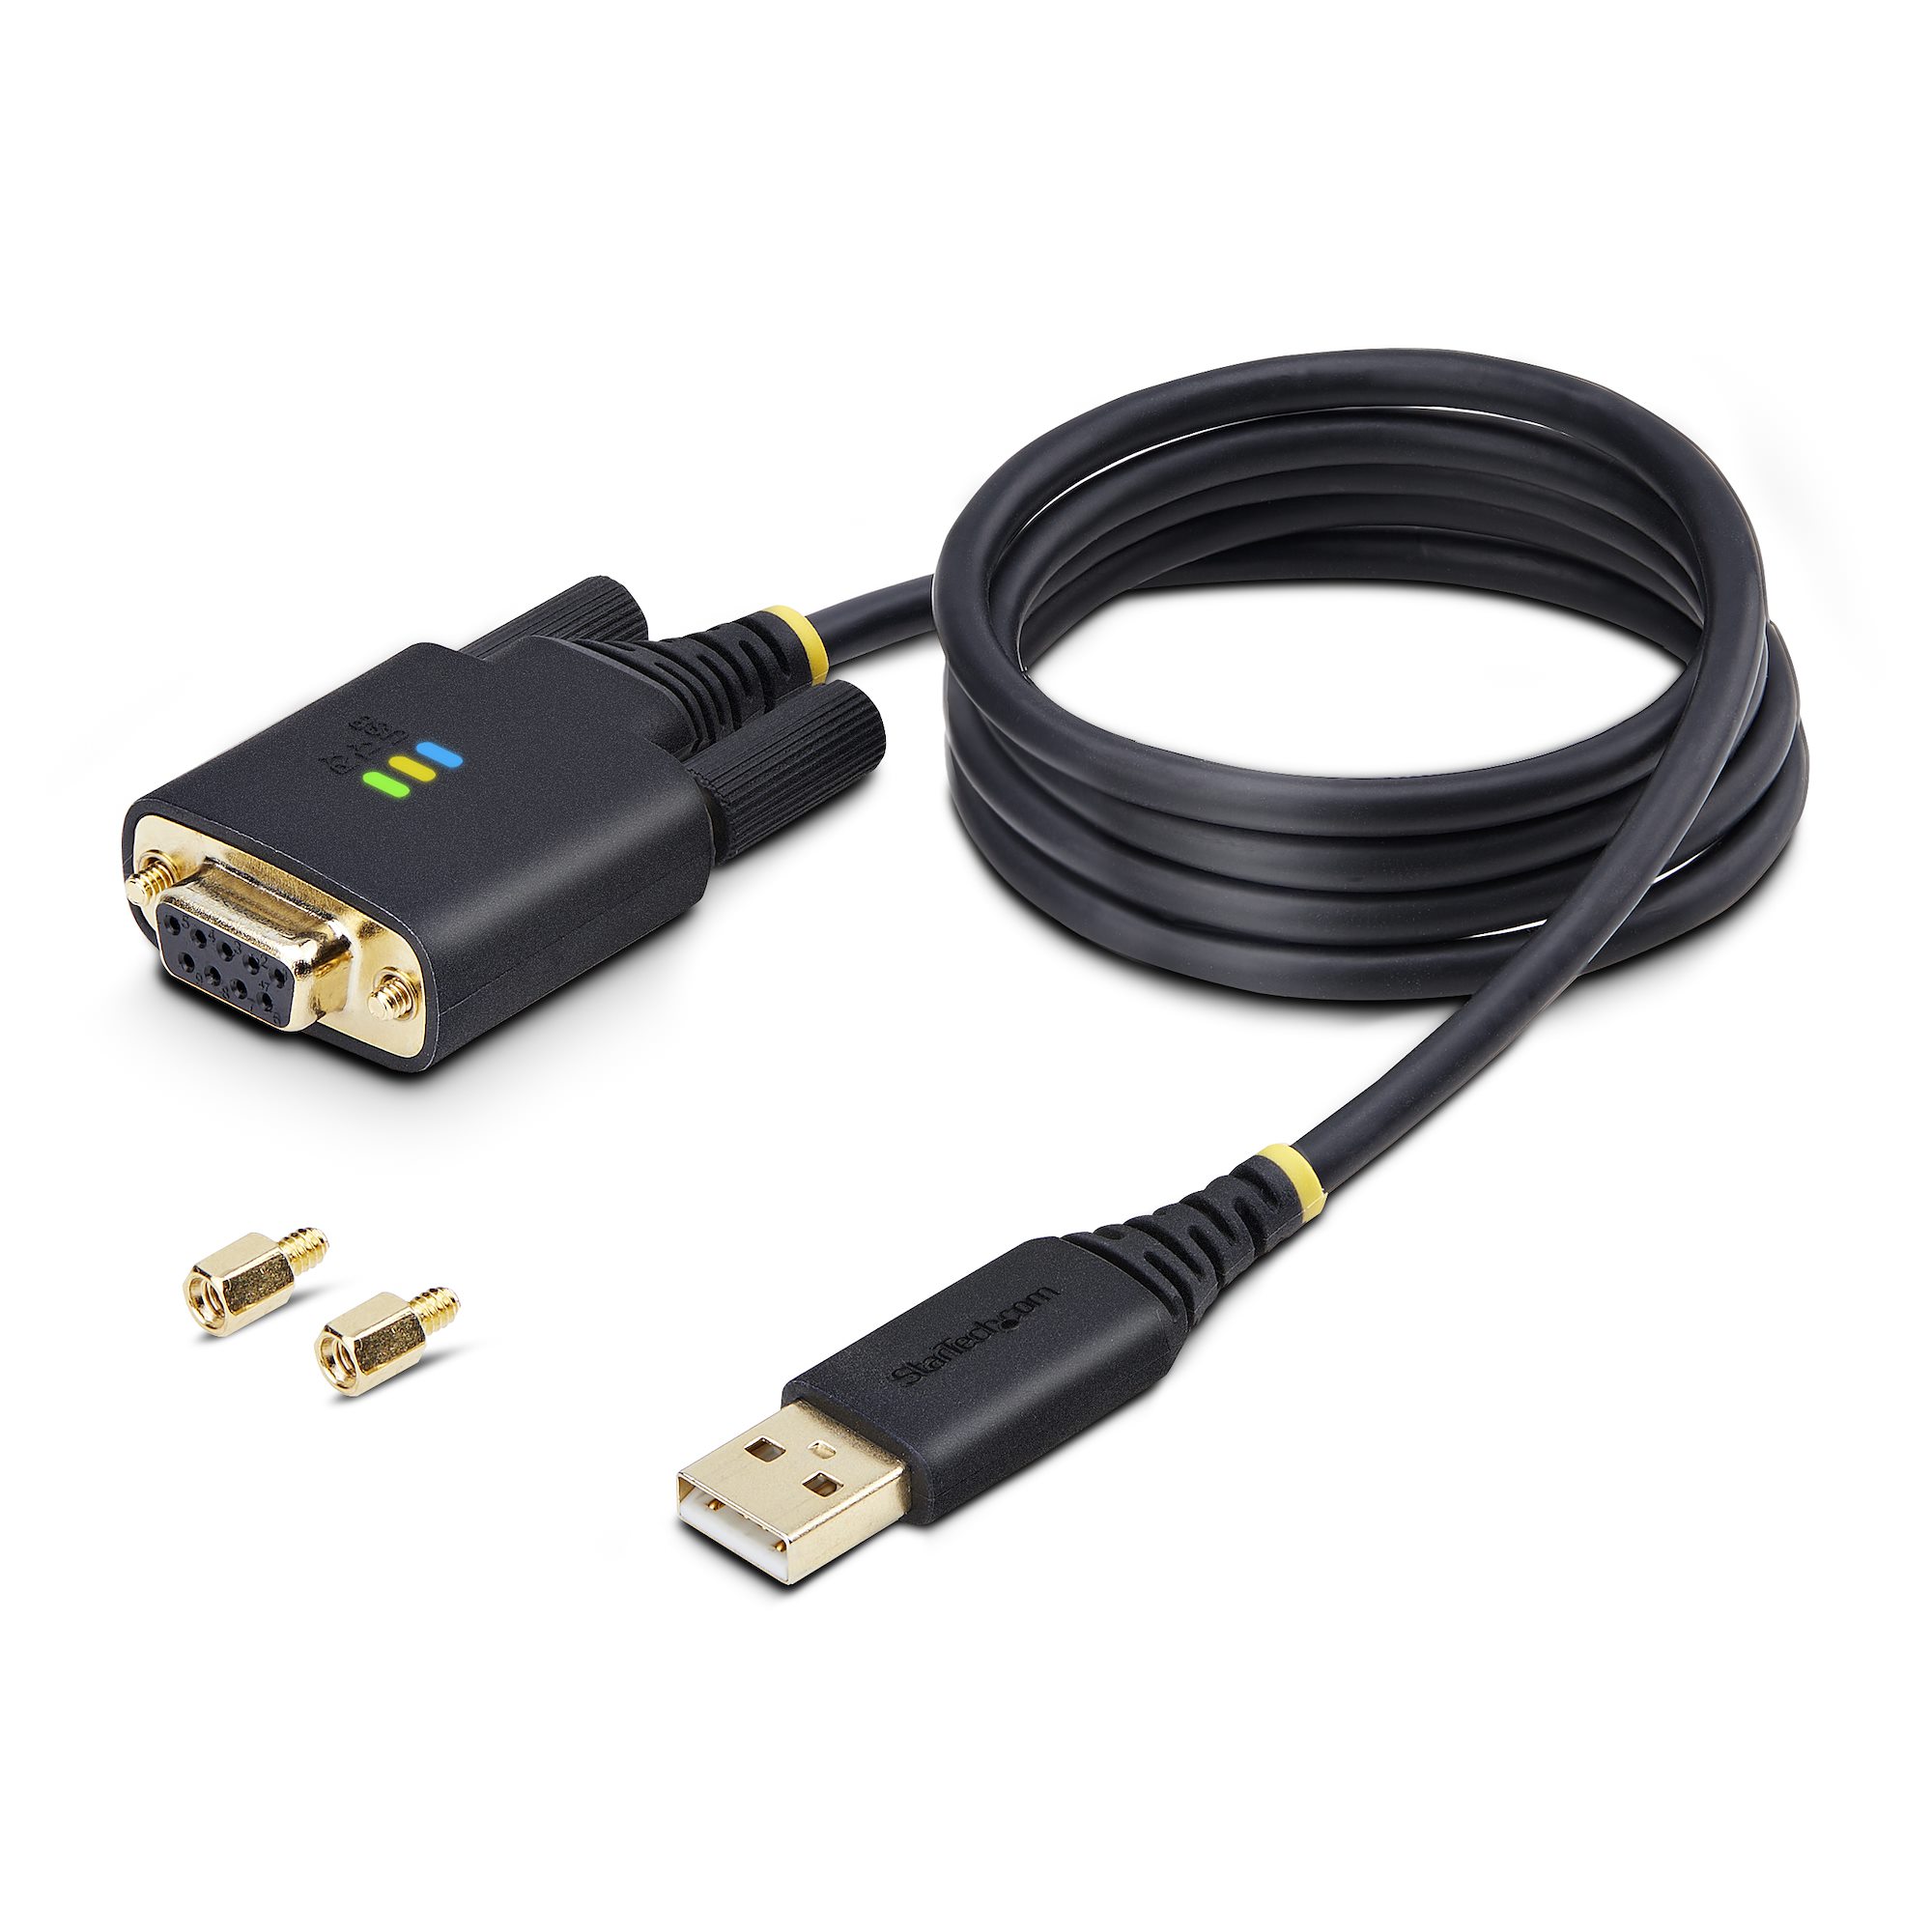 3ft (1m) USB to Null Modem Serial Cable - シリアルカード 